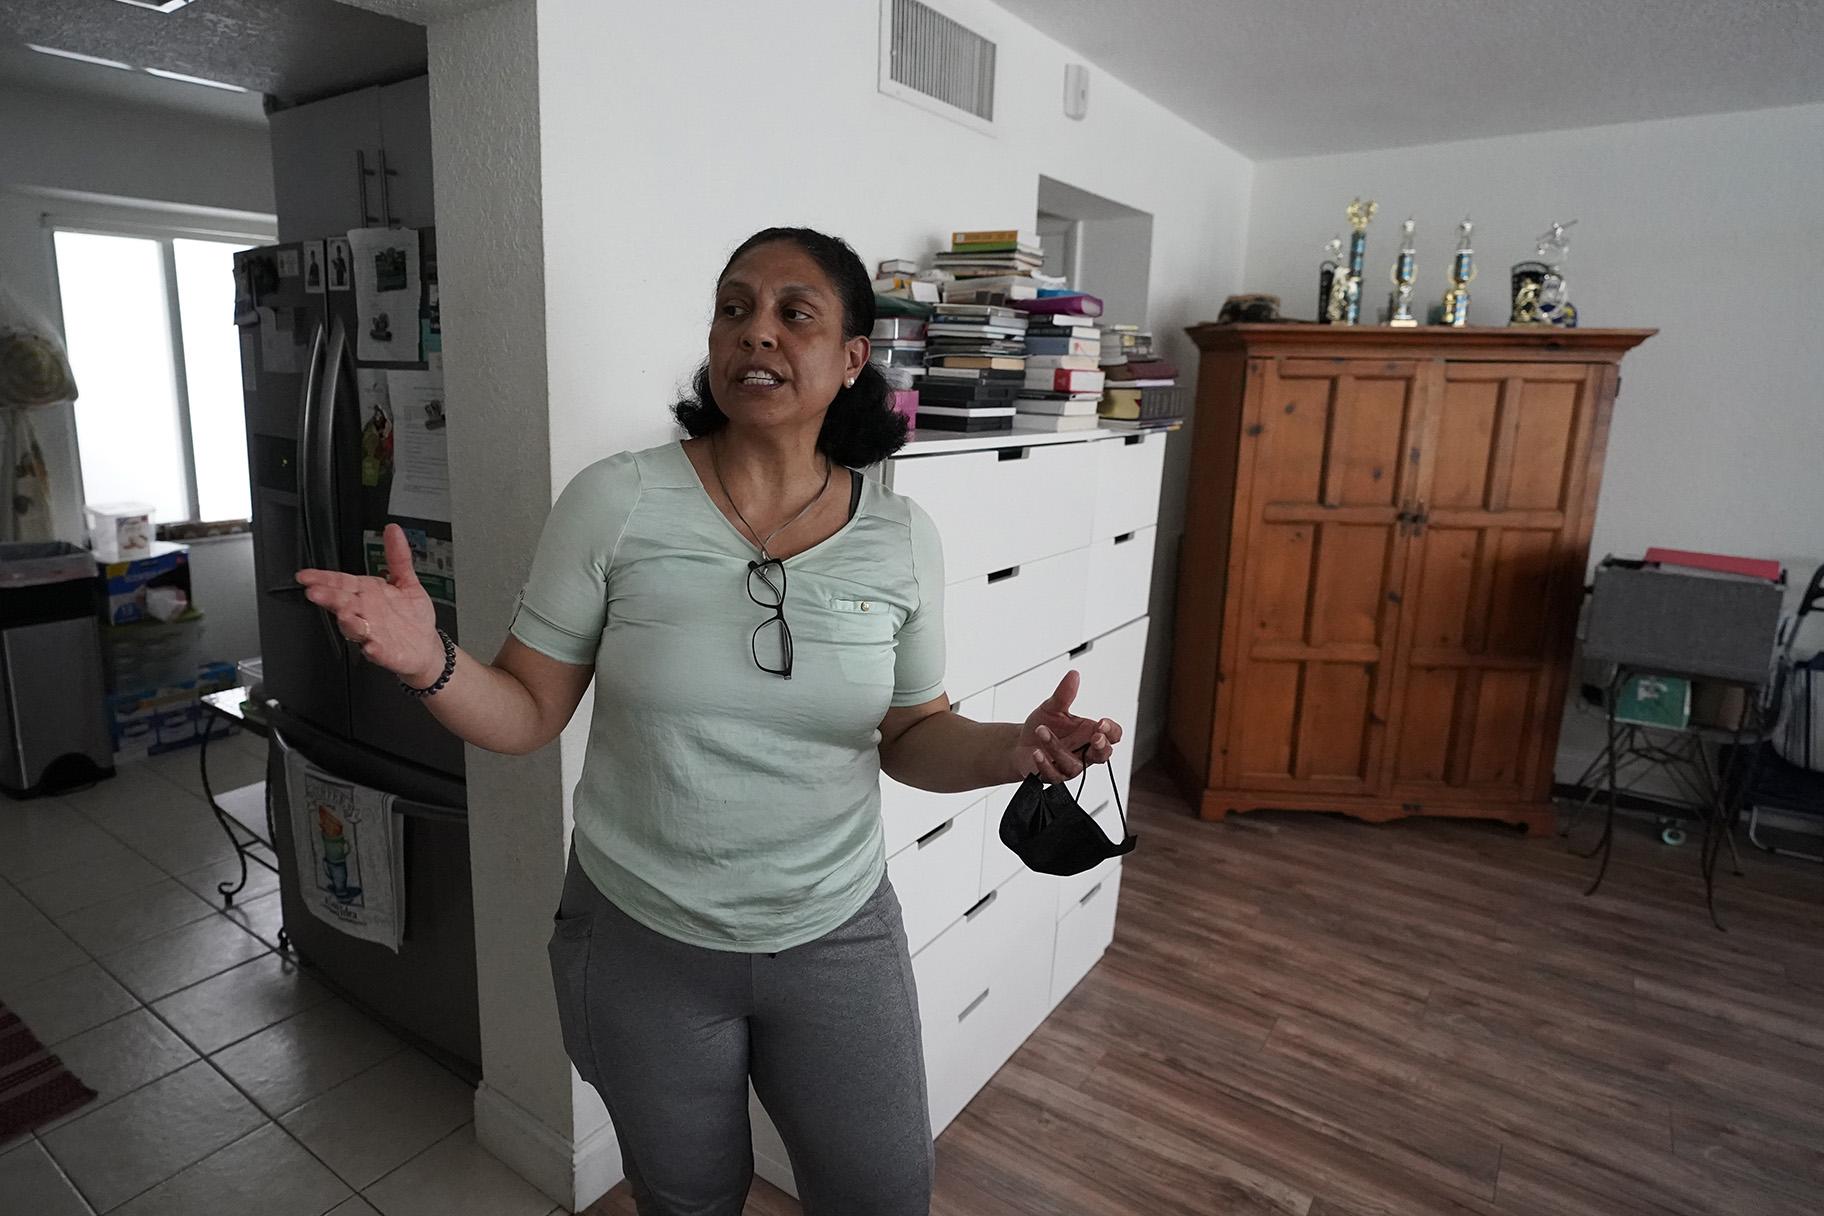 Cristina Livingston recounts the problems she has had in her apartment including a leaking ceiling and mold, Friday, June 18, 2021, at her home in Bay Harbor Islands, Fla. (AP Photo / Wilfredo Lee)